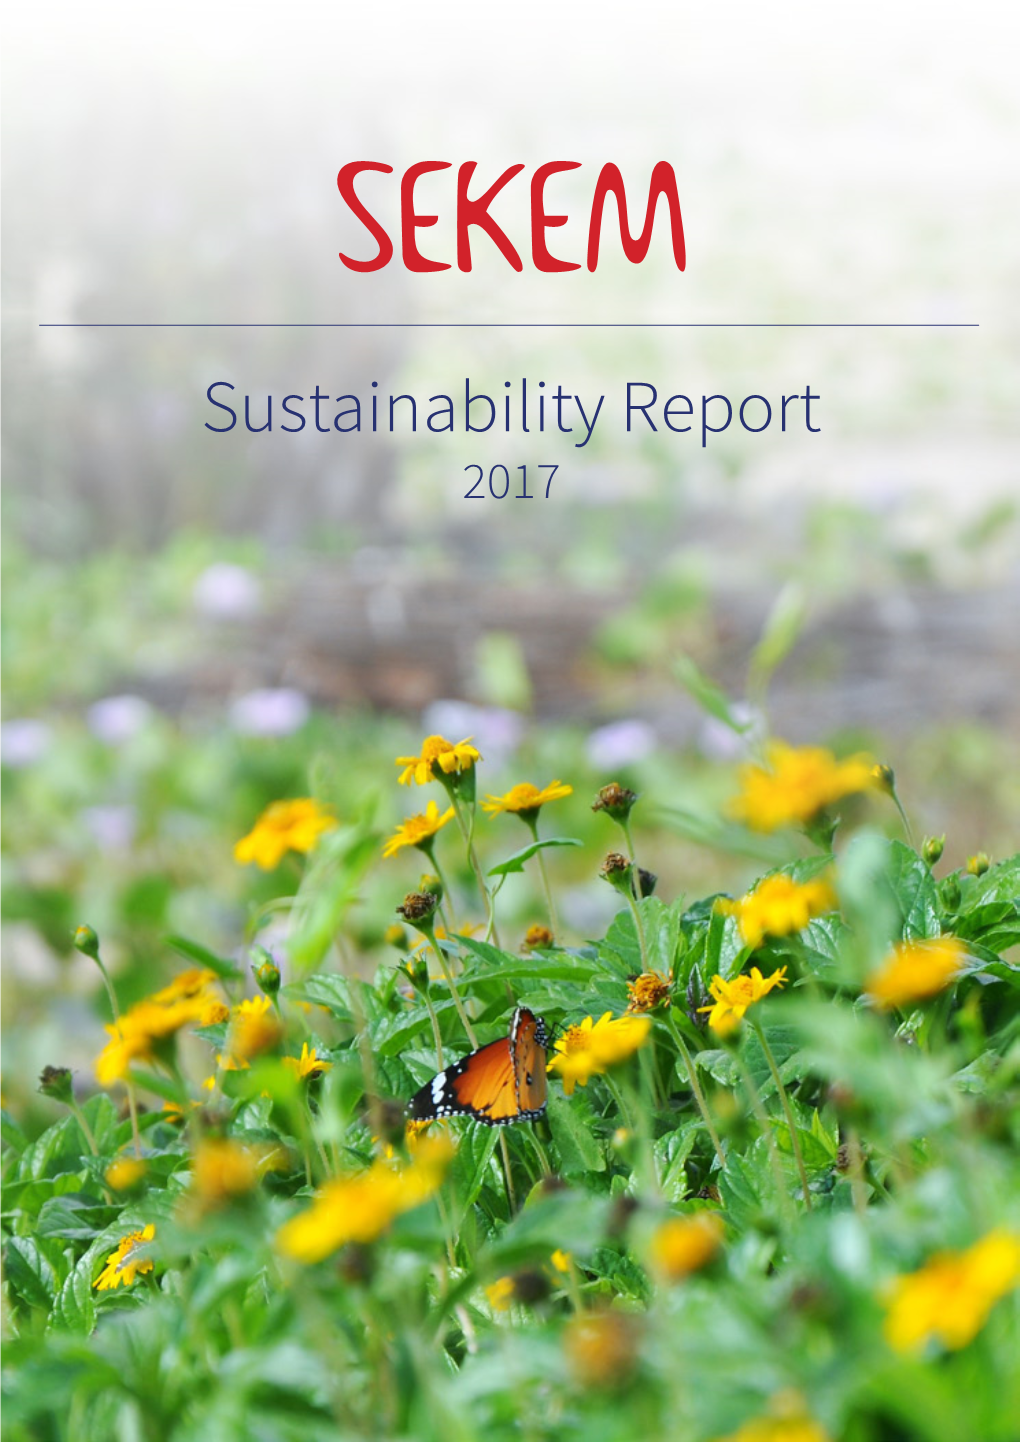 Read the SEKEM Sustainability Report 2017